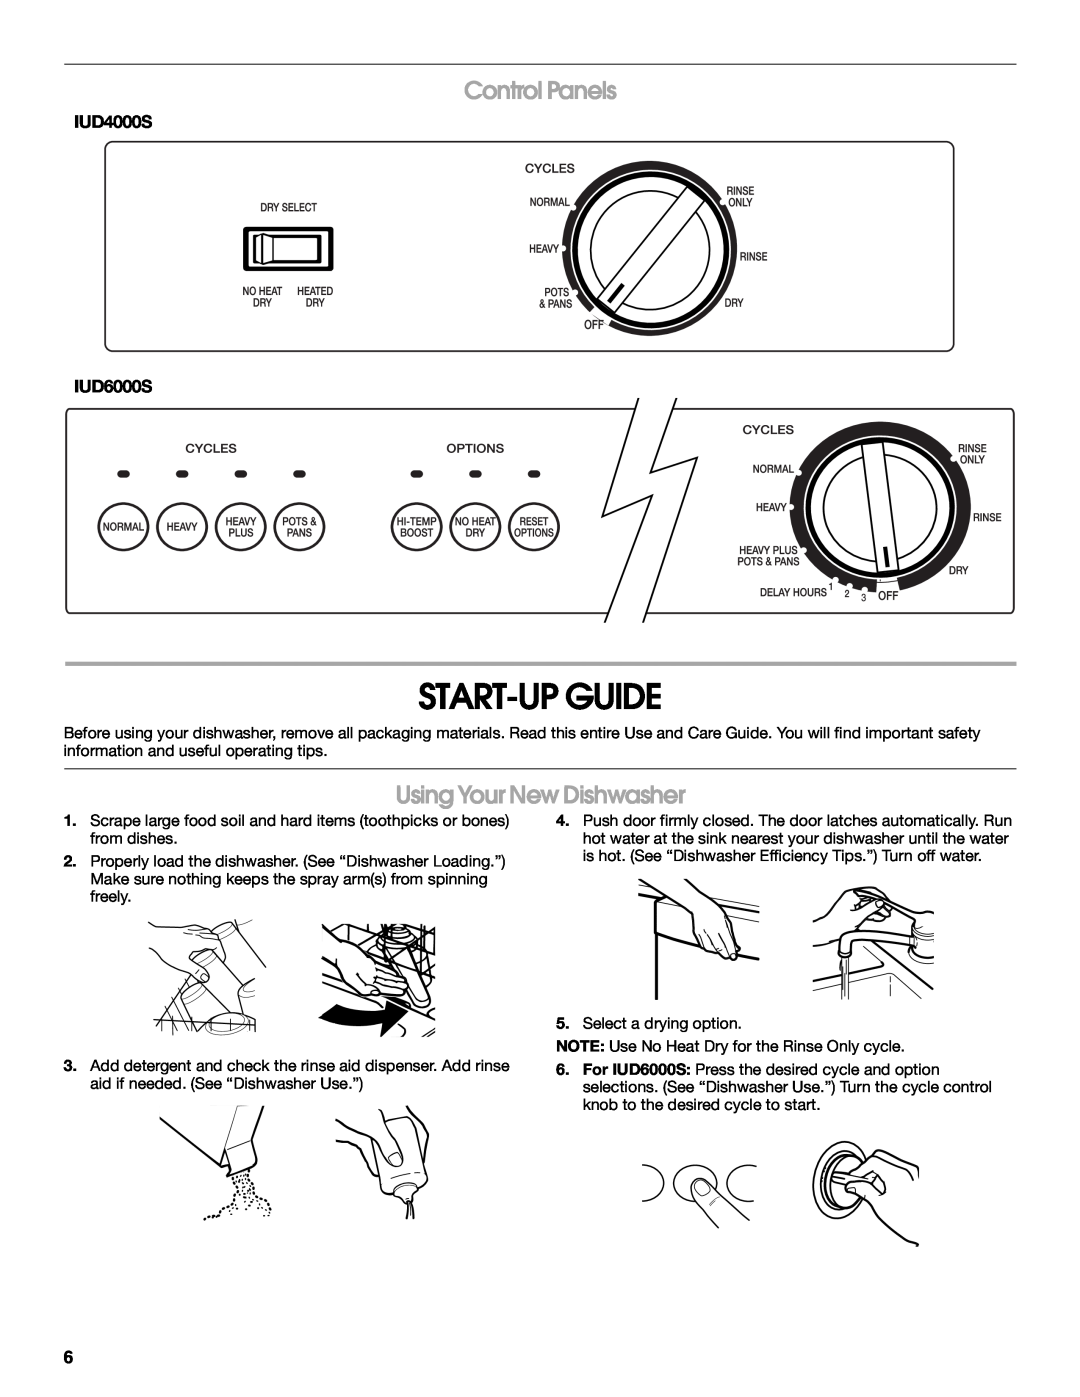 IKEA manual Start-Up Guide, Control Panels, Using Your New Dishwasher, IUD4000S IUD6000S 